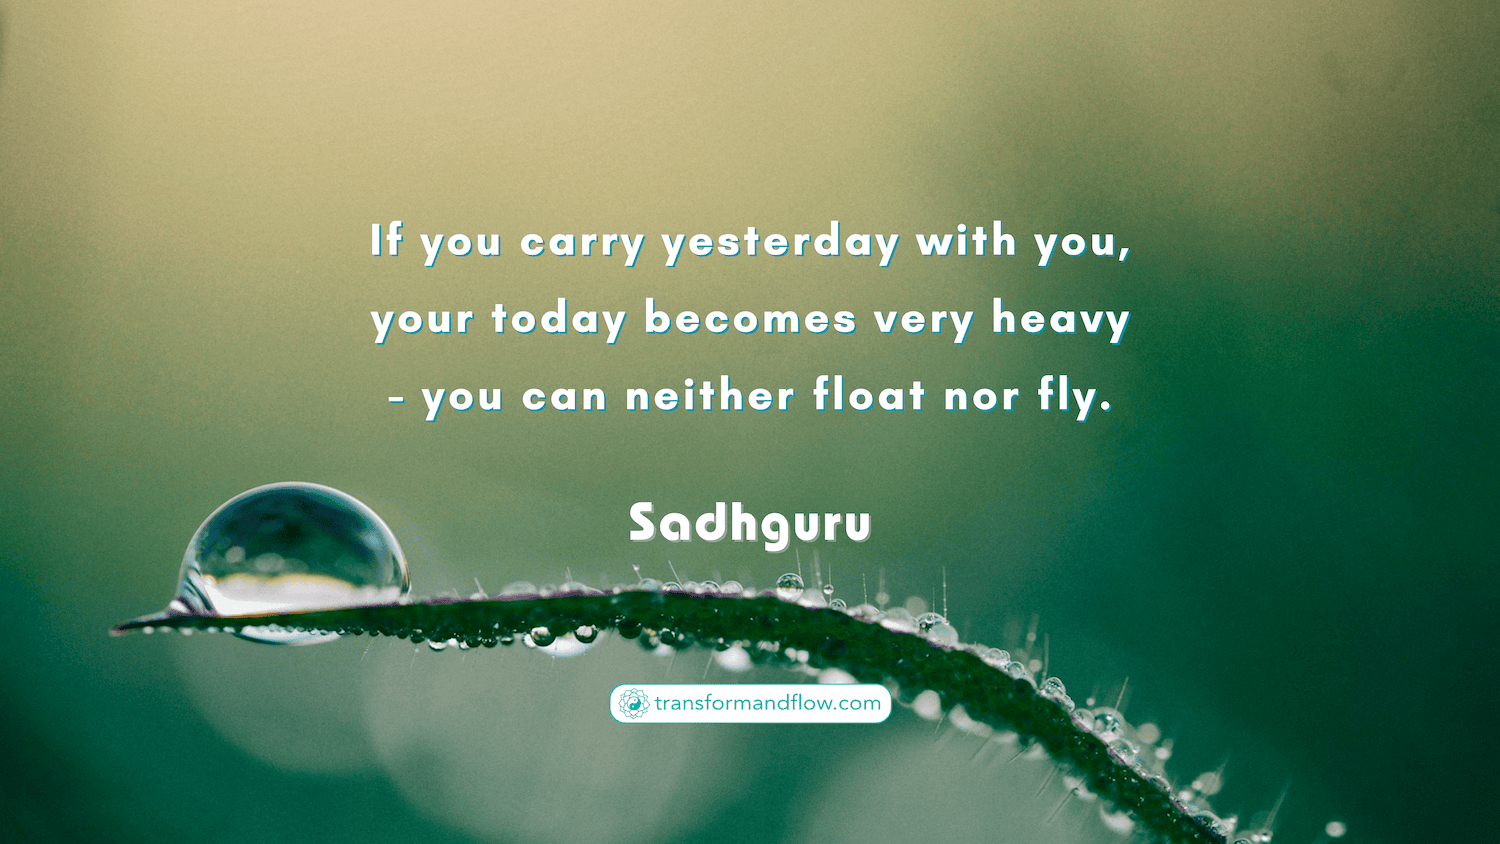 If you carry yesterday with you, your today becomes very heavy - you can neither float nor fly. Sadhguru